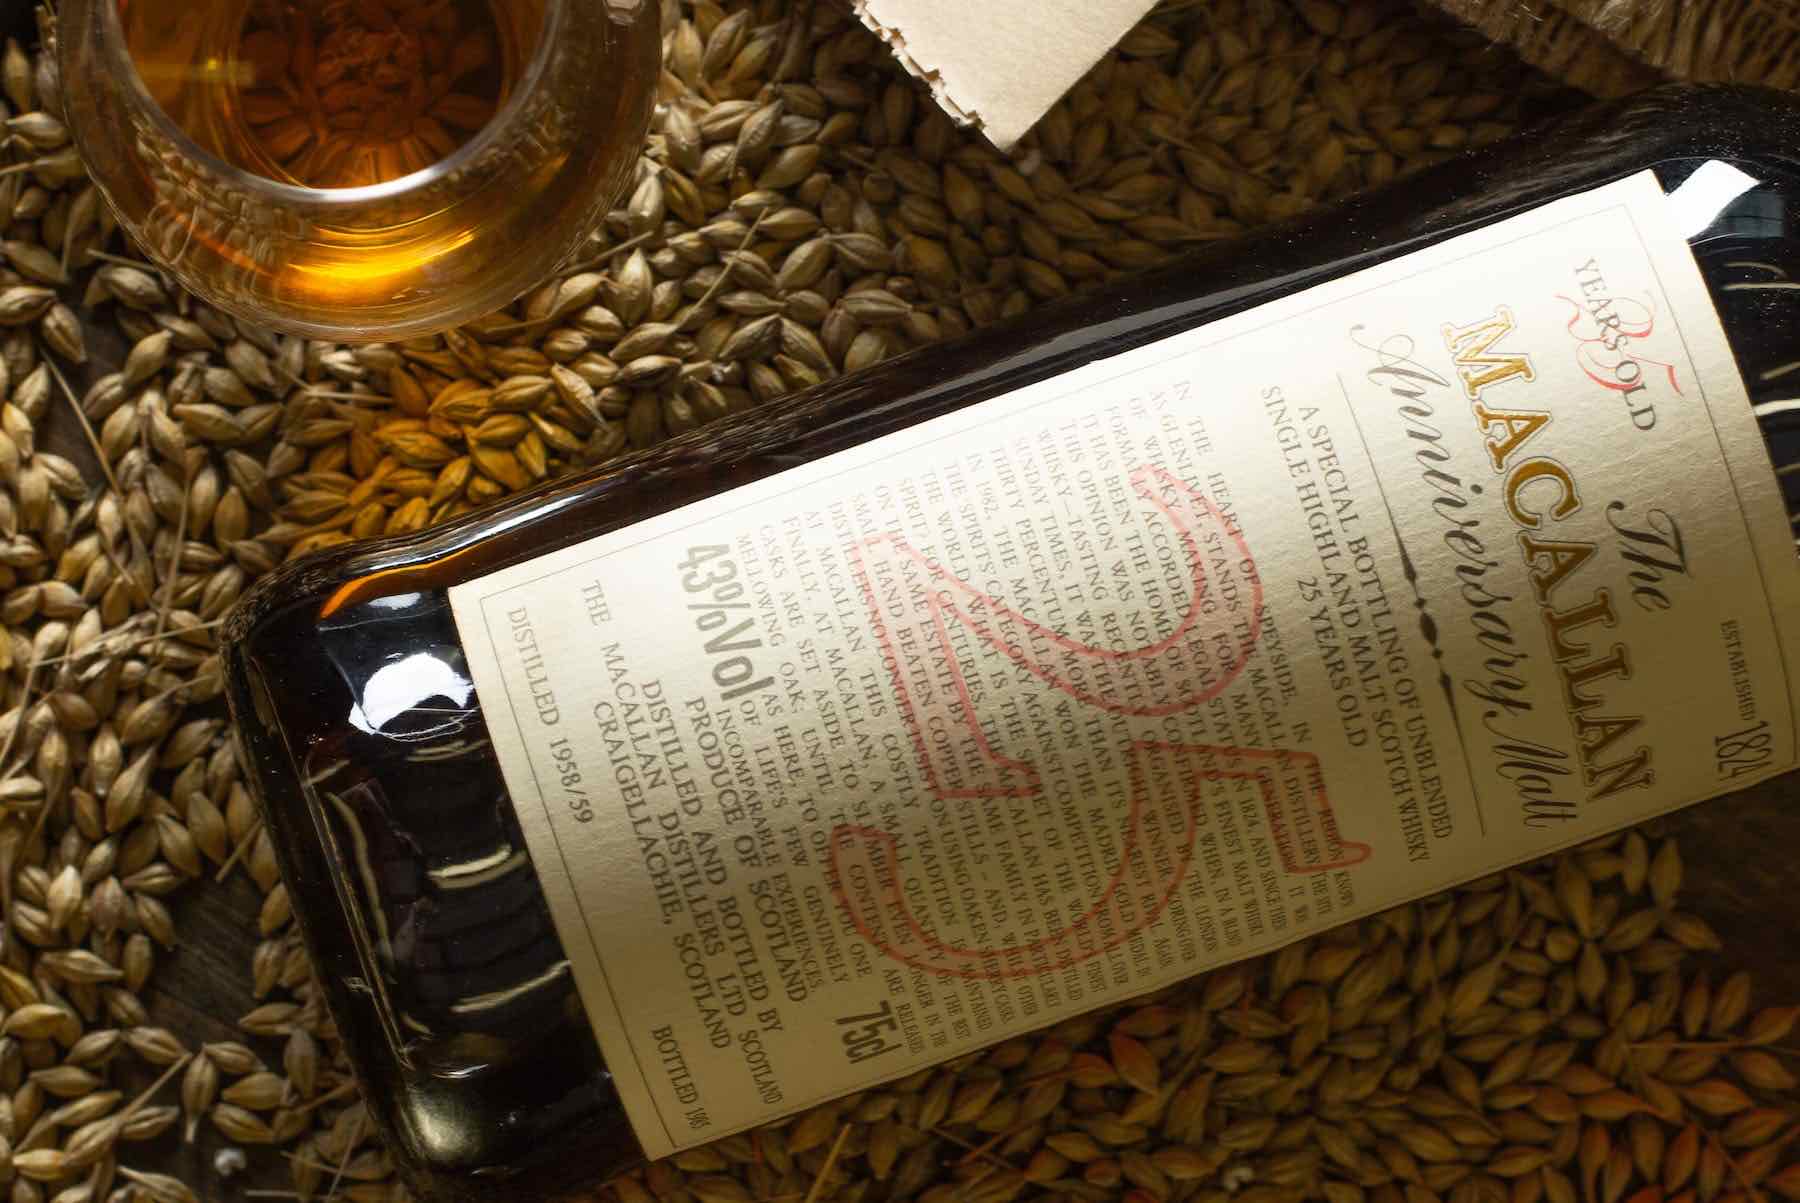 The Macallan 25 Year Old Anniversary Malts single malt scotch whisky rare and collectable investment